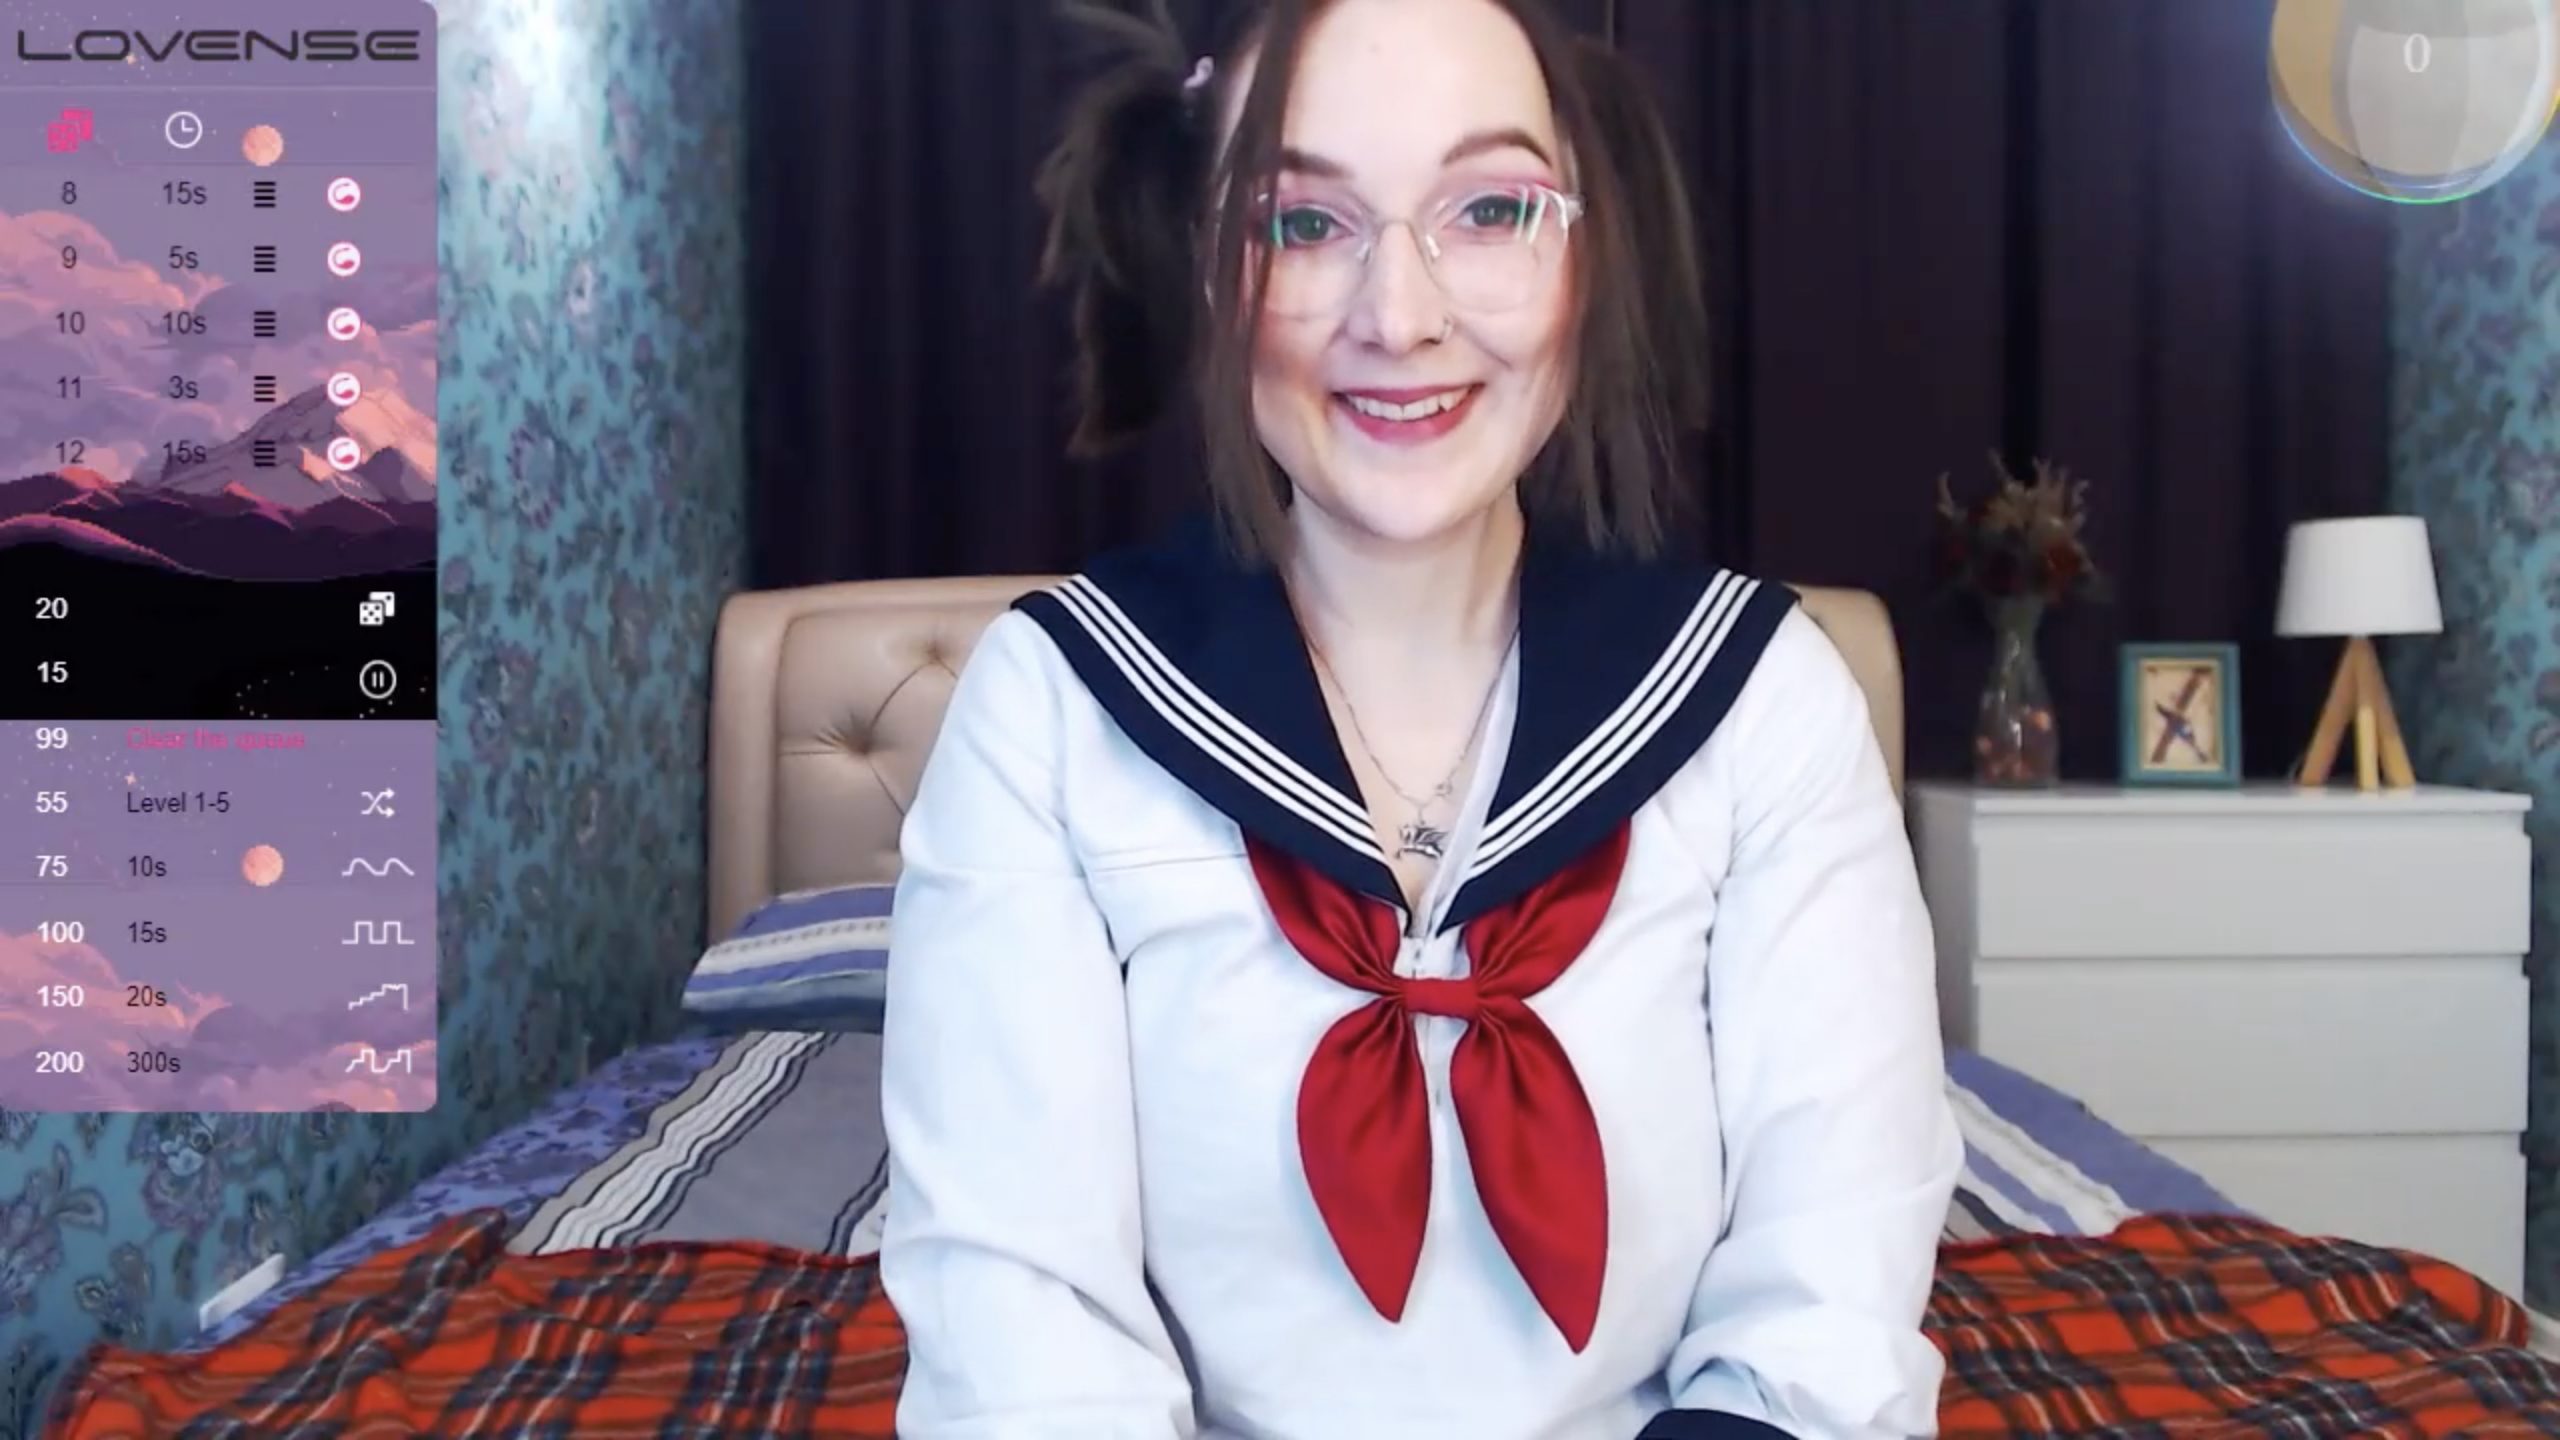 WinonaCooper Is Cruisin' In Her Sailor Suit And Looking Adorable While At It